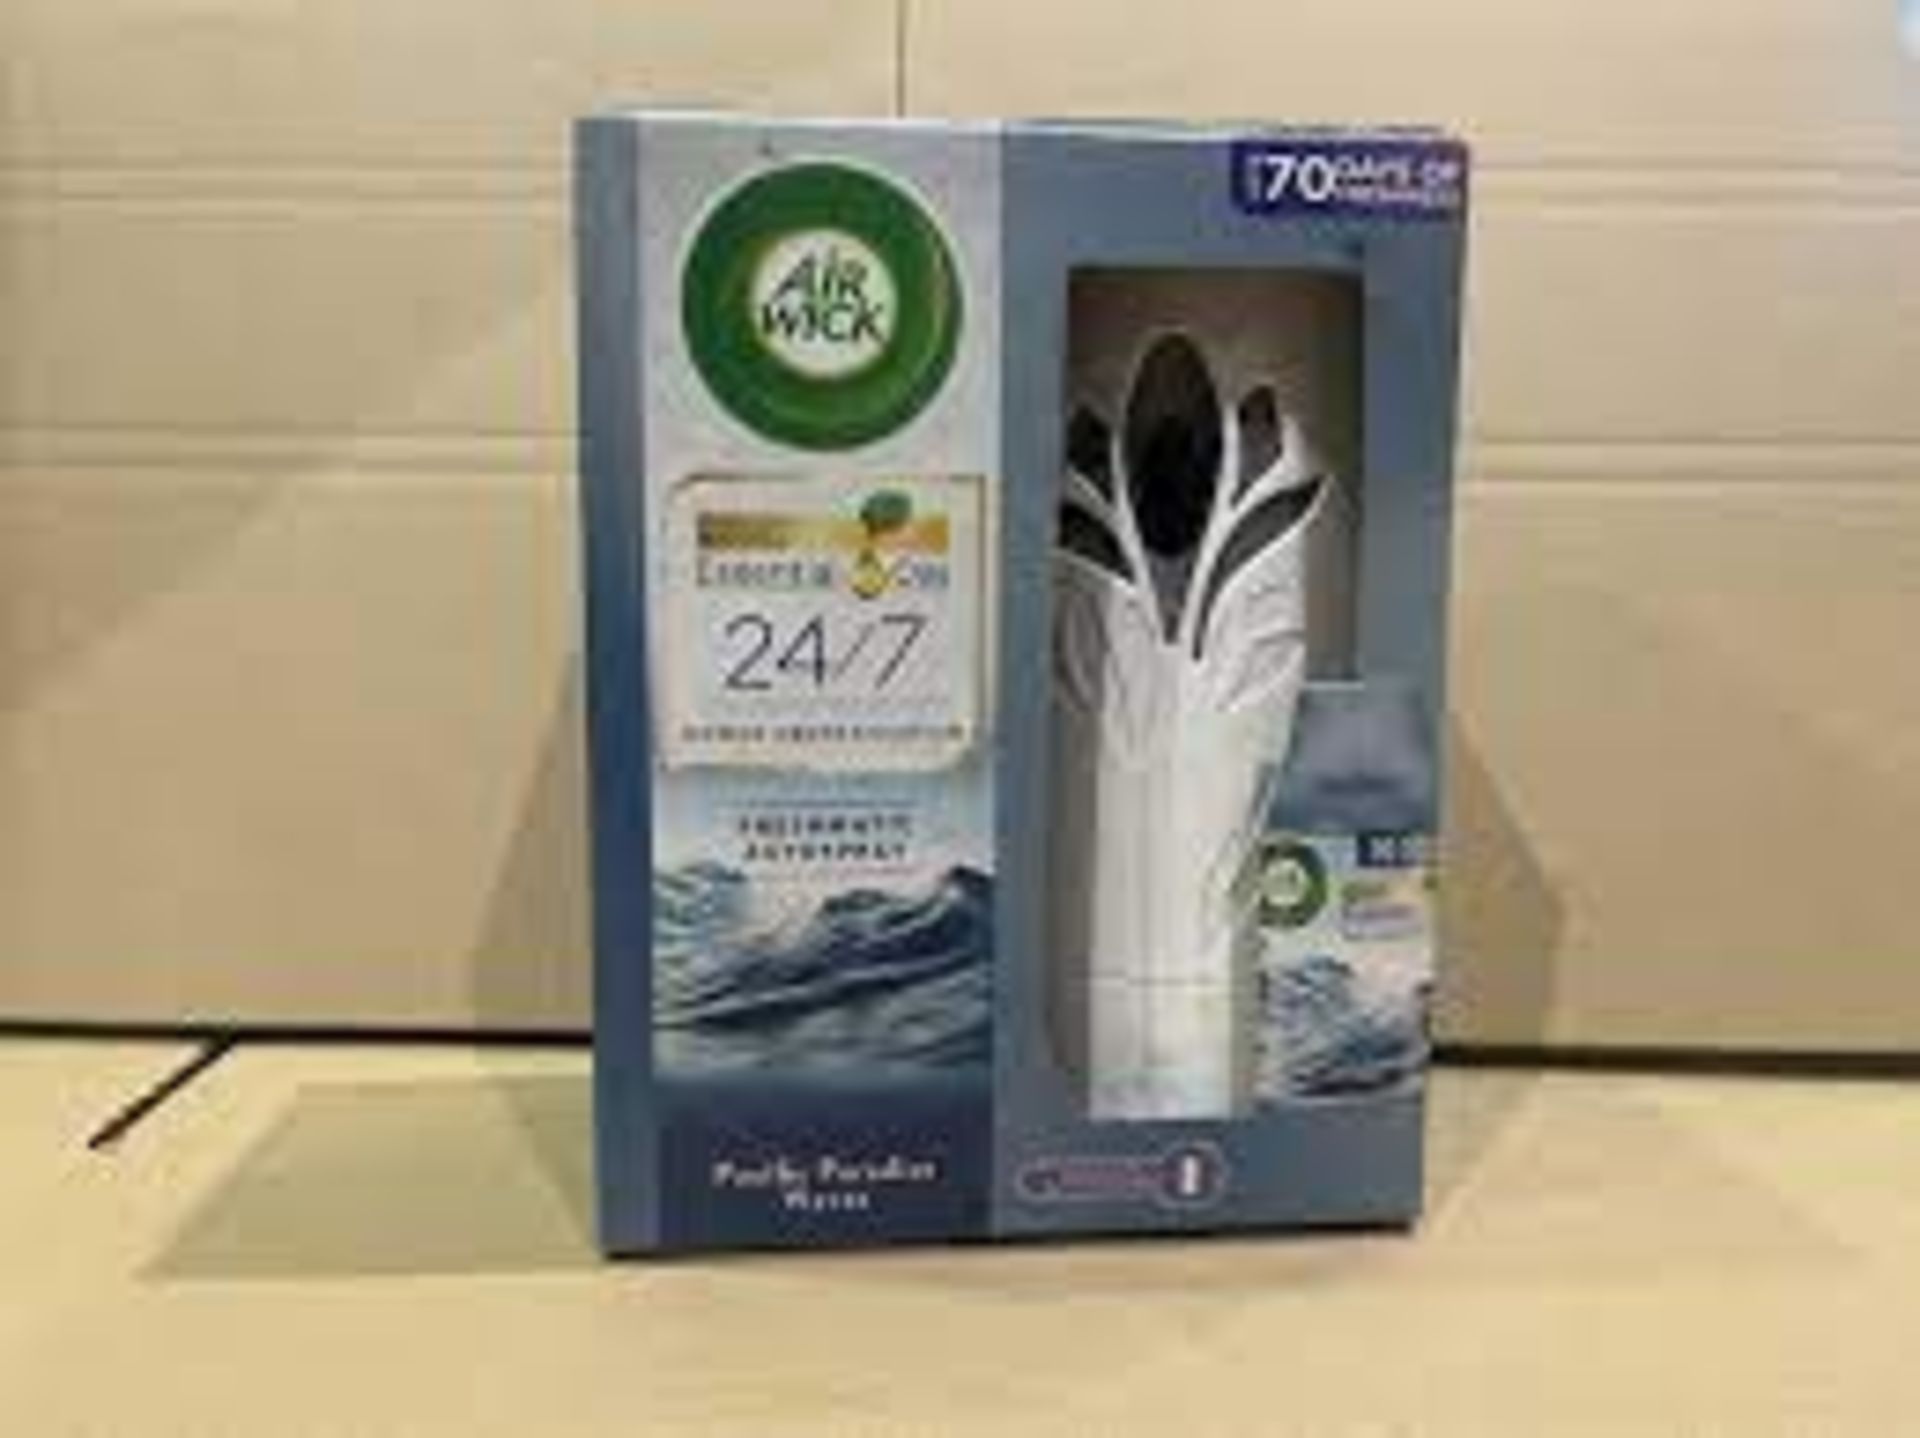 2 X BRAND NEW AIR WICK FRESHMATIC AUTOSPRAY 24/7 ESSENTIAL OILS ODOUR NEUTRALISATION DEVICES WITH